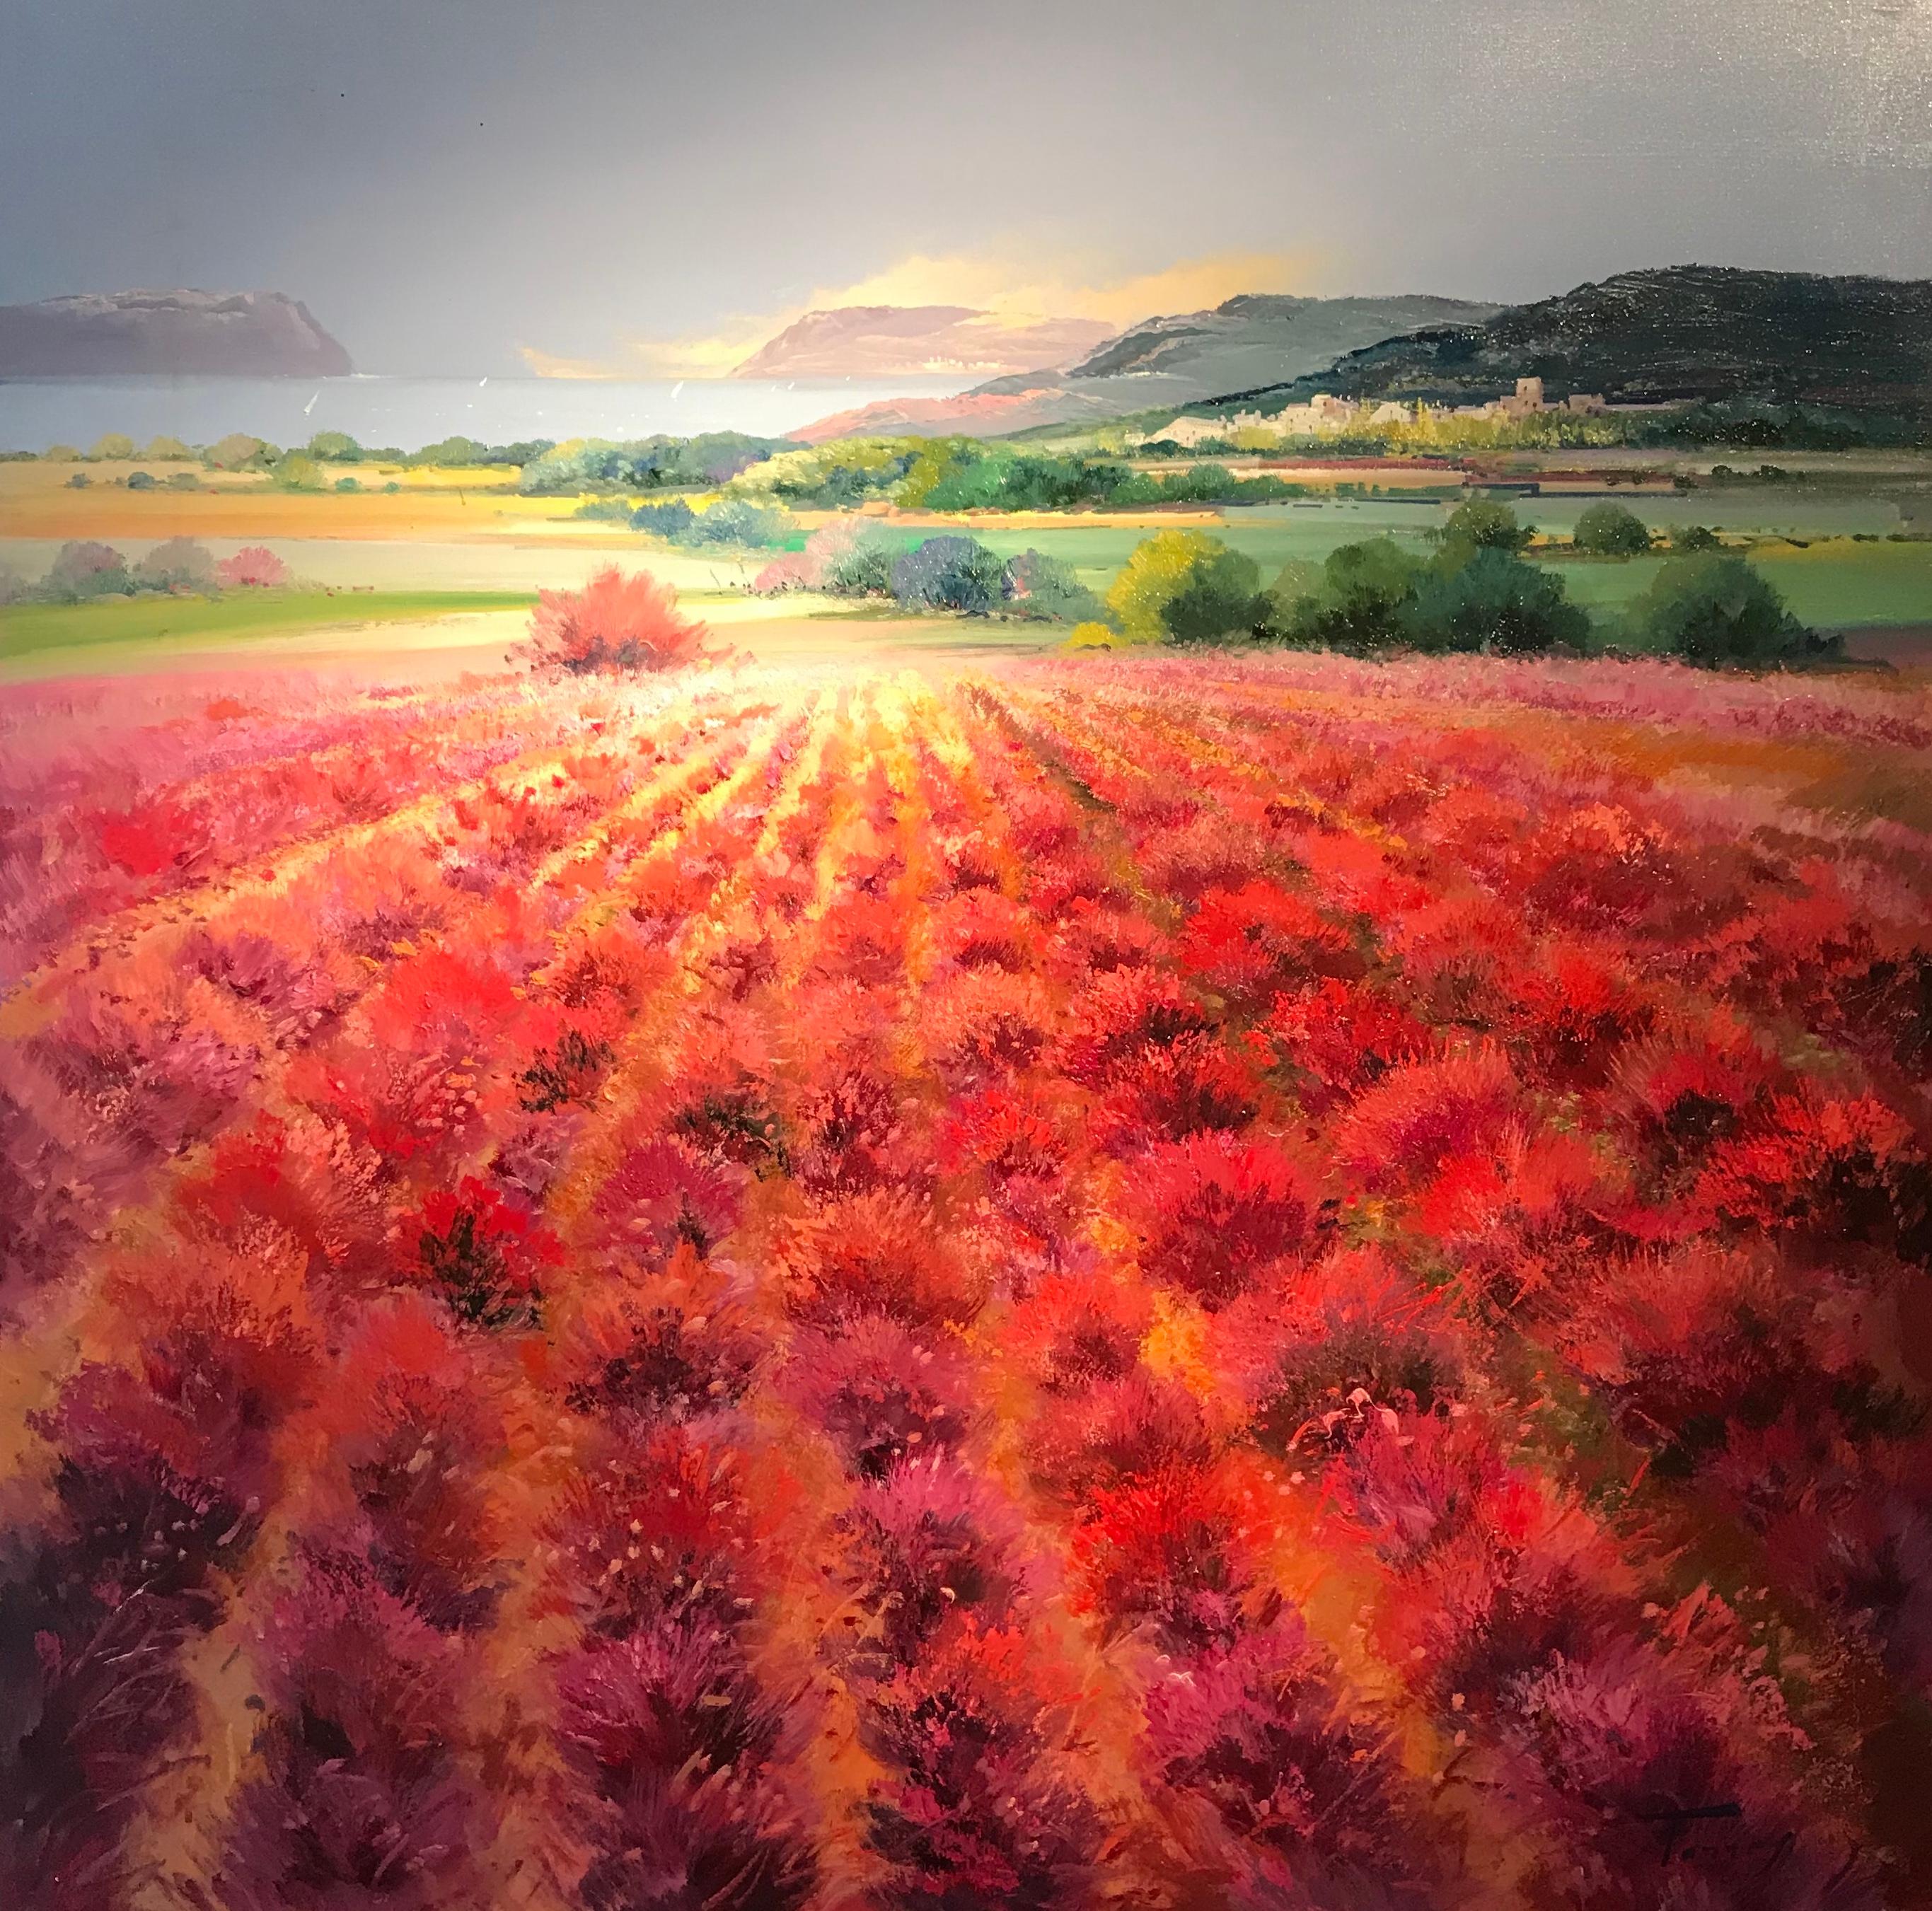 'Scarlet Meadow' by Torres is a stunning rural landscape with rolling hills down to the sea. The beautiful vivid colour palette of the foreground is strong and makes for a composition that is fiery and bold. A huge pop of crimson, pink and red jump